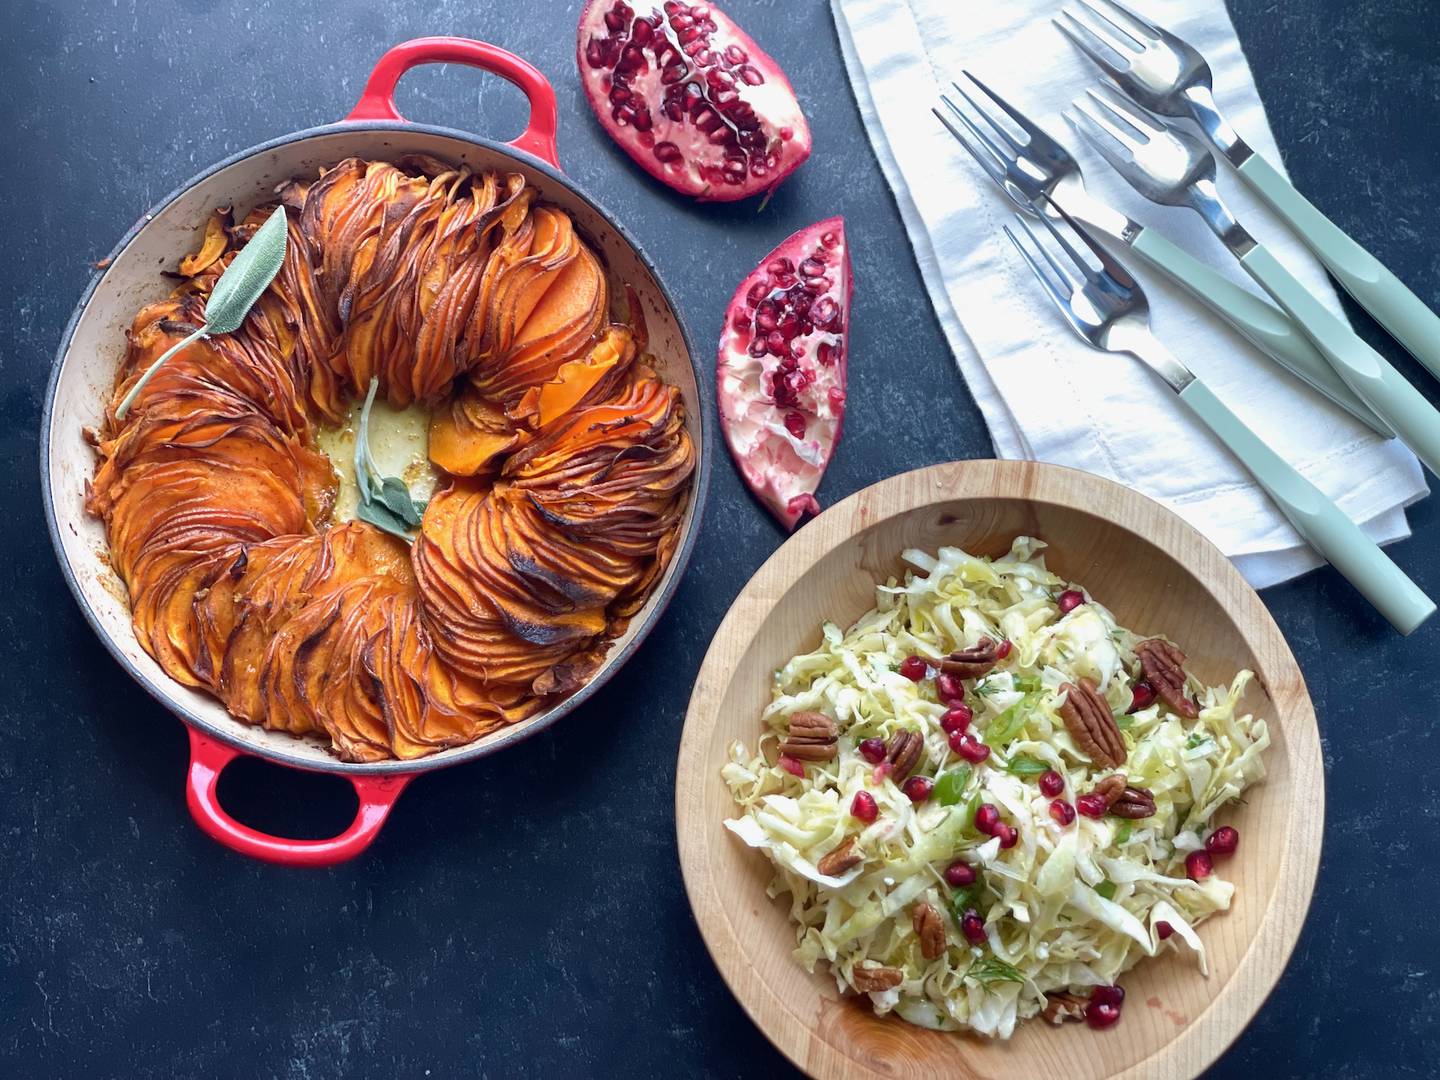 Two holiday vegetable side dishes, including roasted sweet potato and orange and green slaw with feta, dill and pomegranate